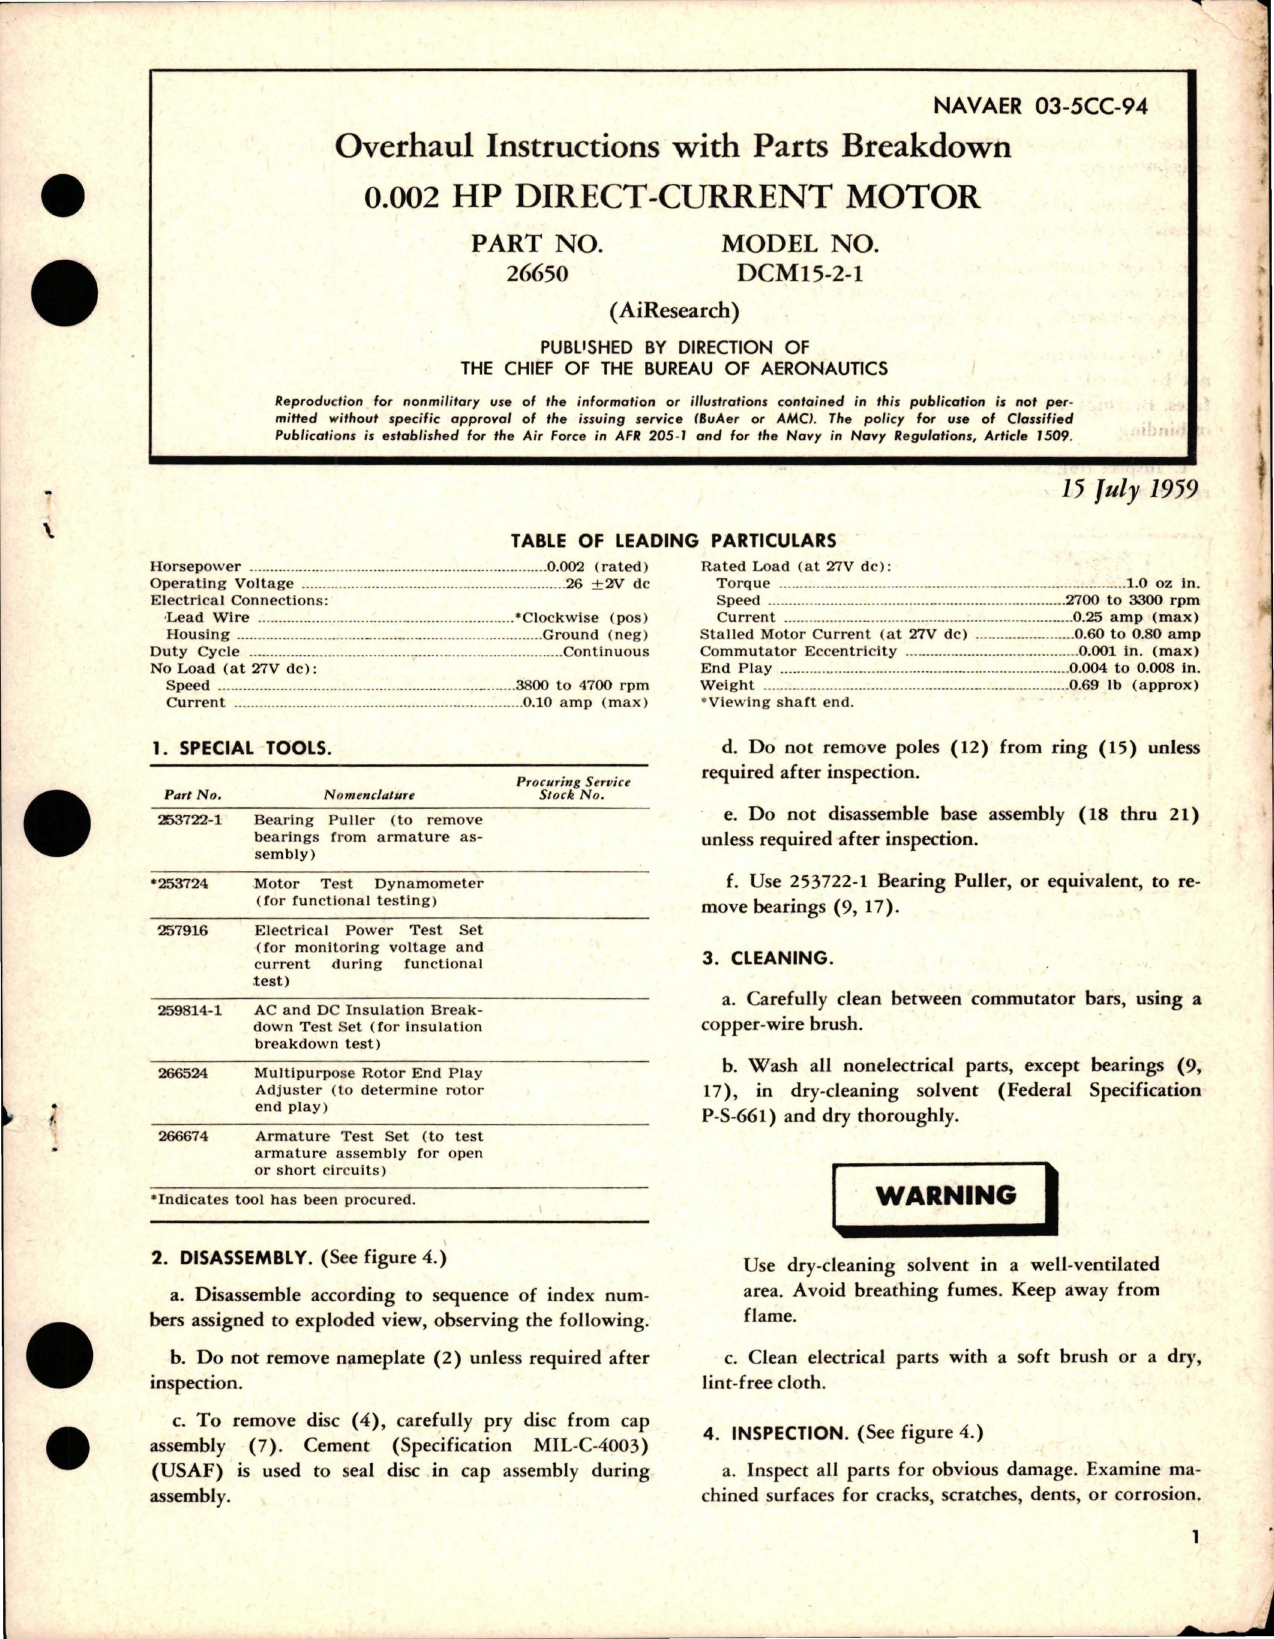 Sample page 1 from AirCorps Library document: Overhaul Instructions with Parts Breakdown for Direct-Current Motor 0.002 HP - Part 26650 - Model DCM15-2-1